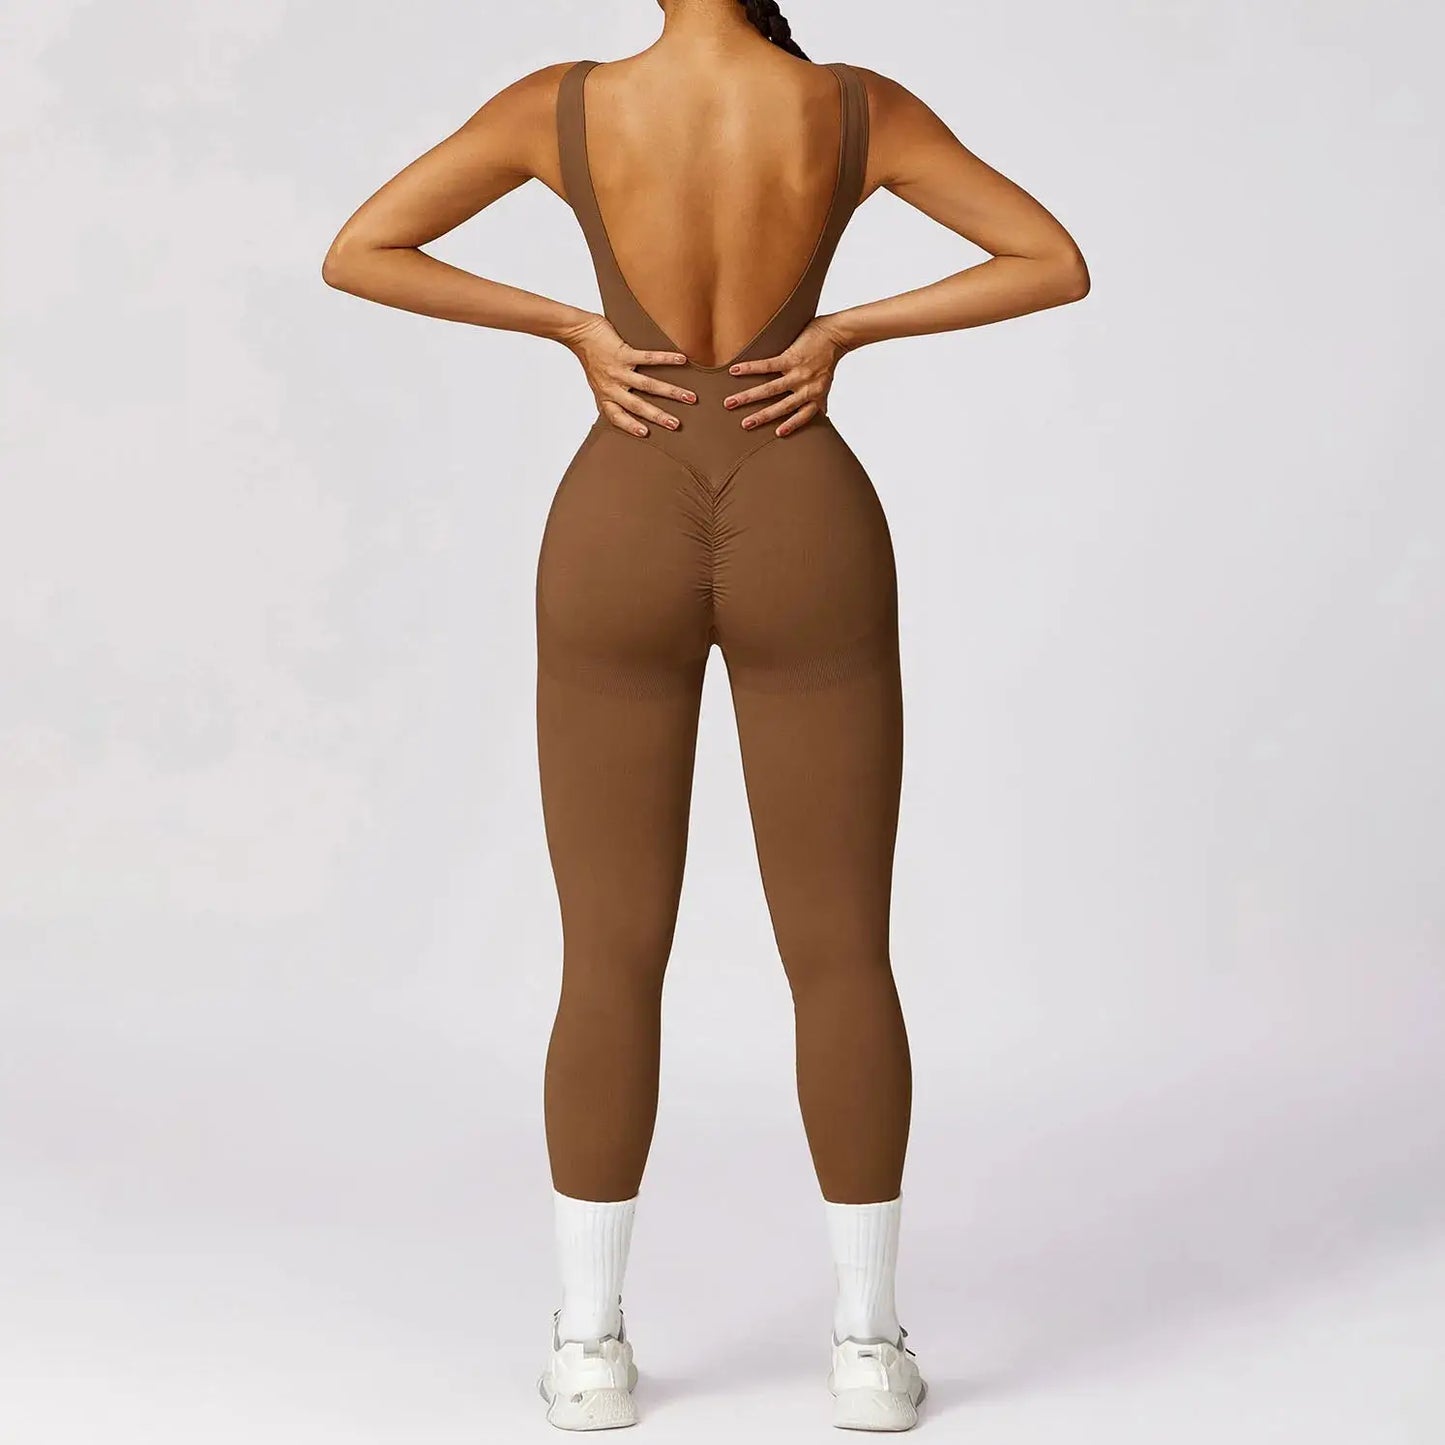 YIYI V Back Scrunch Butt High Stretchy Gym Leggings Jumpsuits Girls High Impact Bra Seamless Rompers Sports Jumpsuit For Women